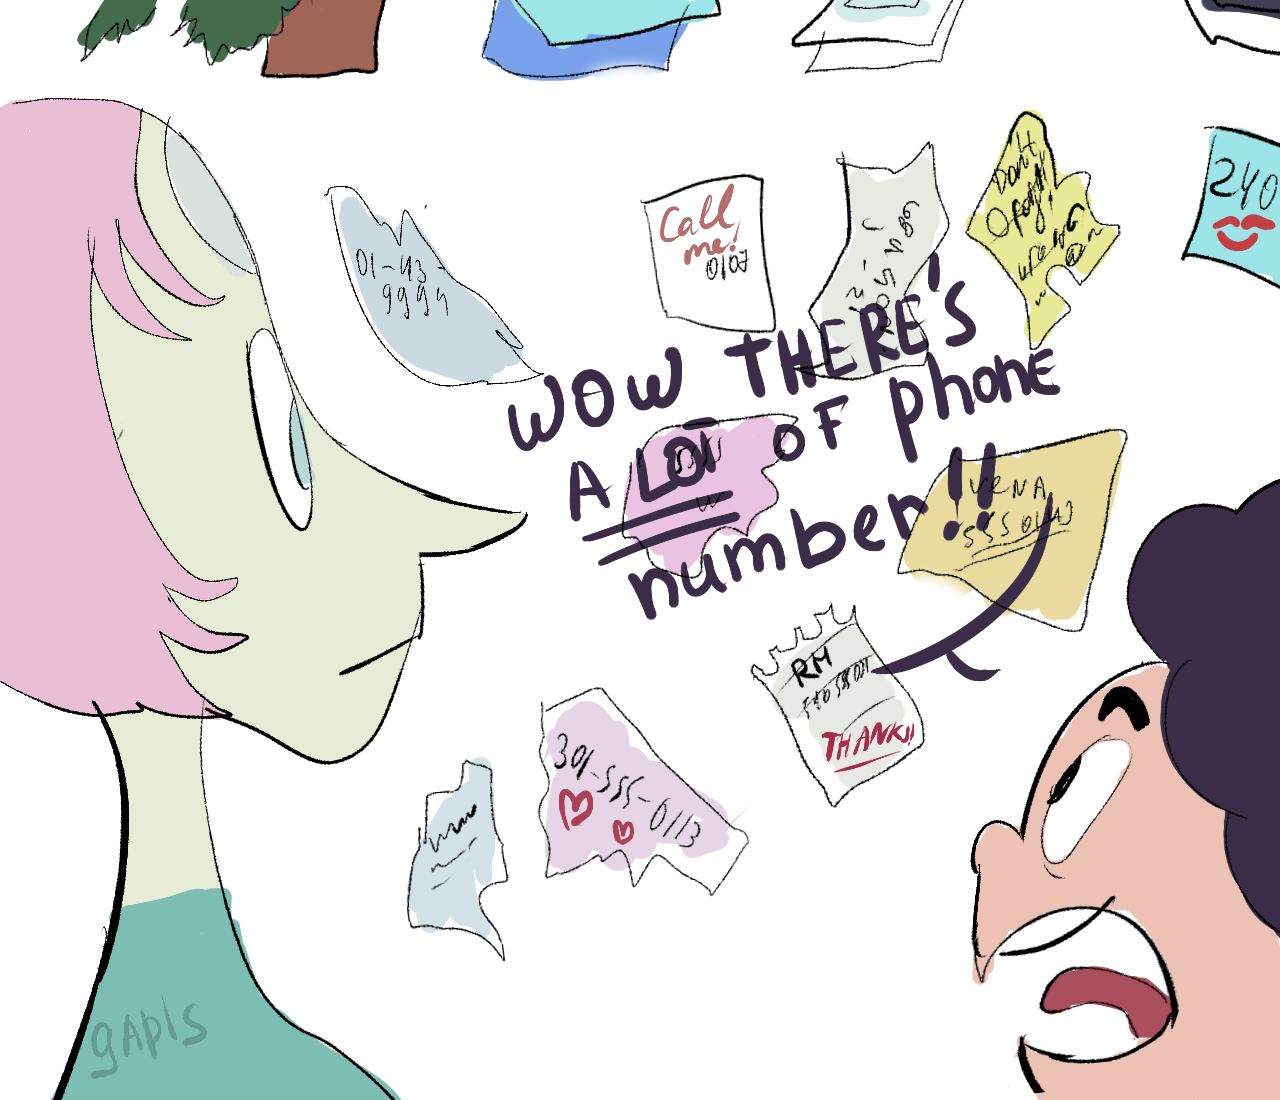 Did you notice how many phone numbers Pearl have??